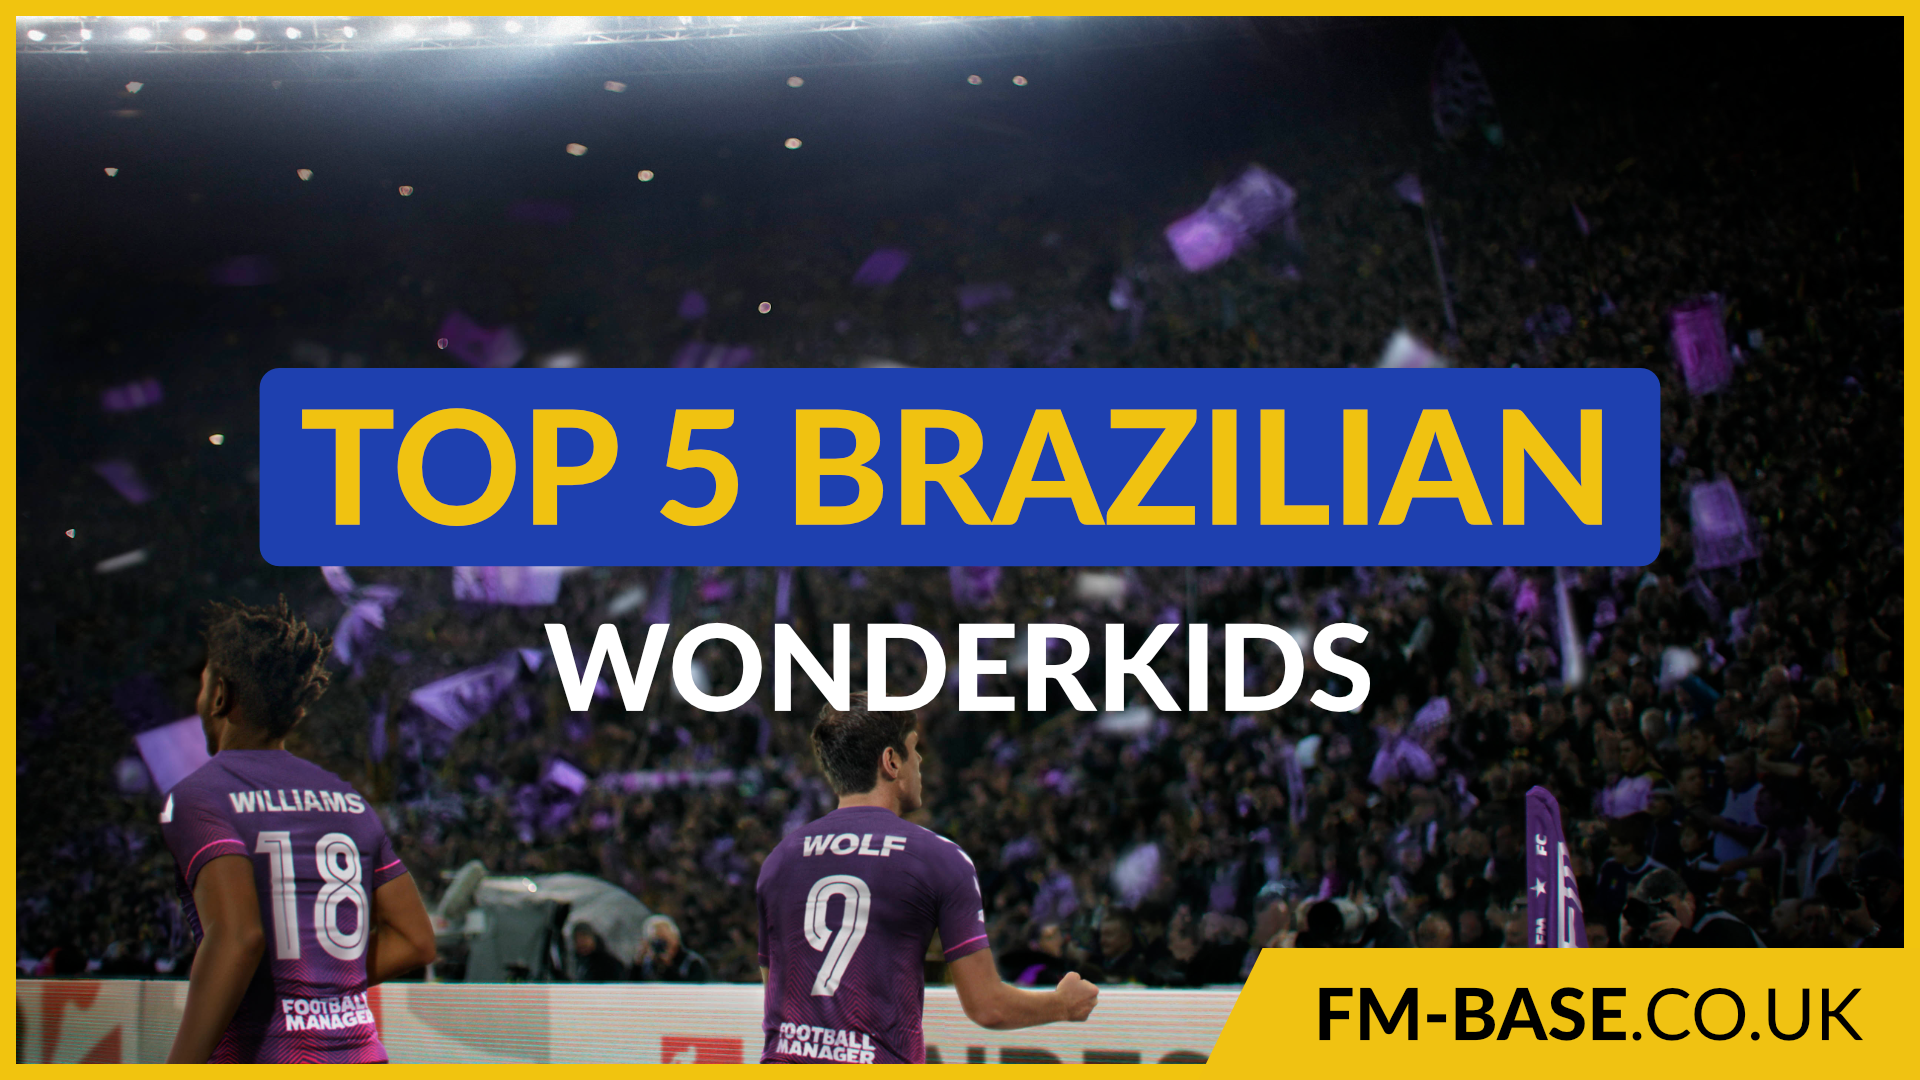 The Top 5 Brazilian Wonderkids in Football Manager 2022